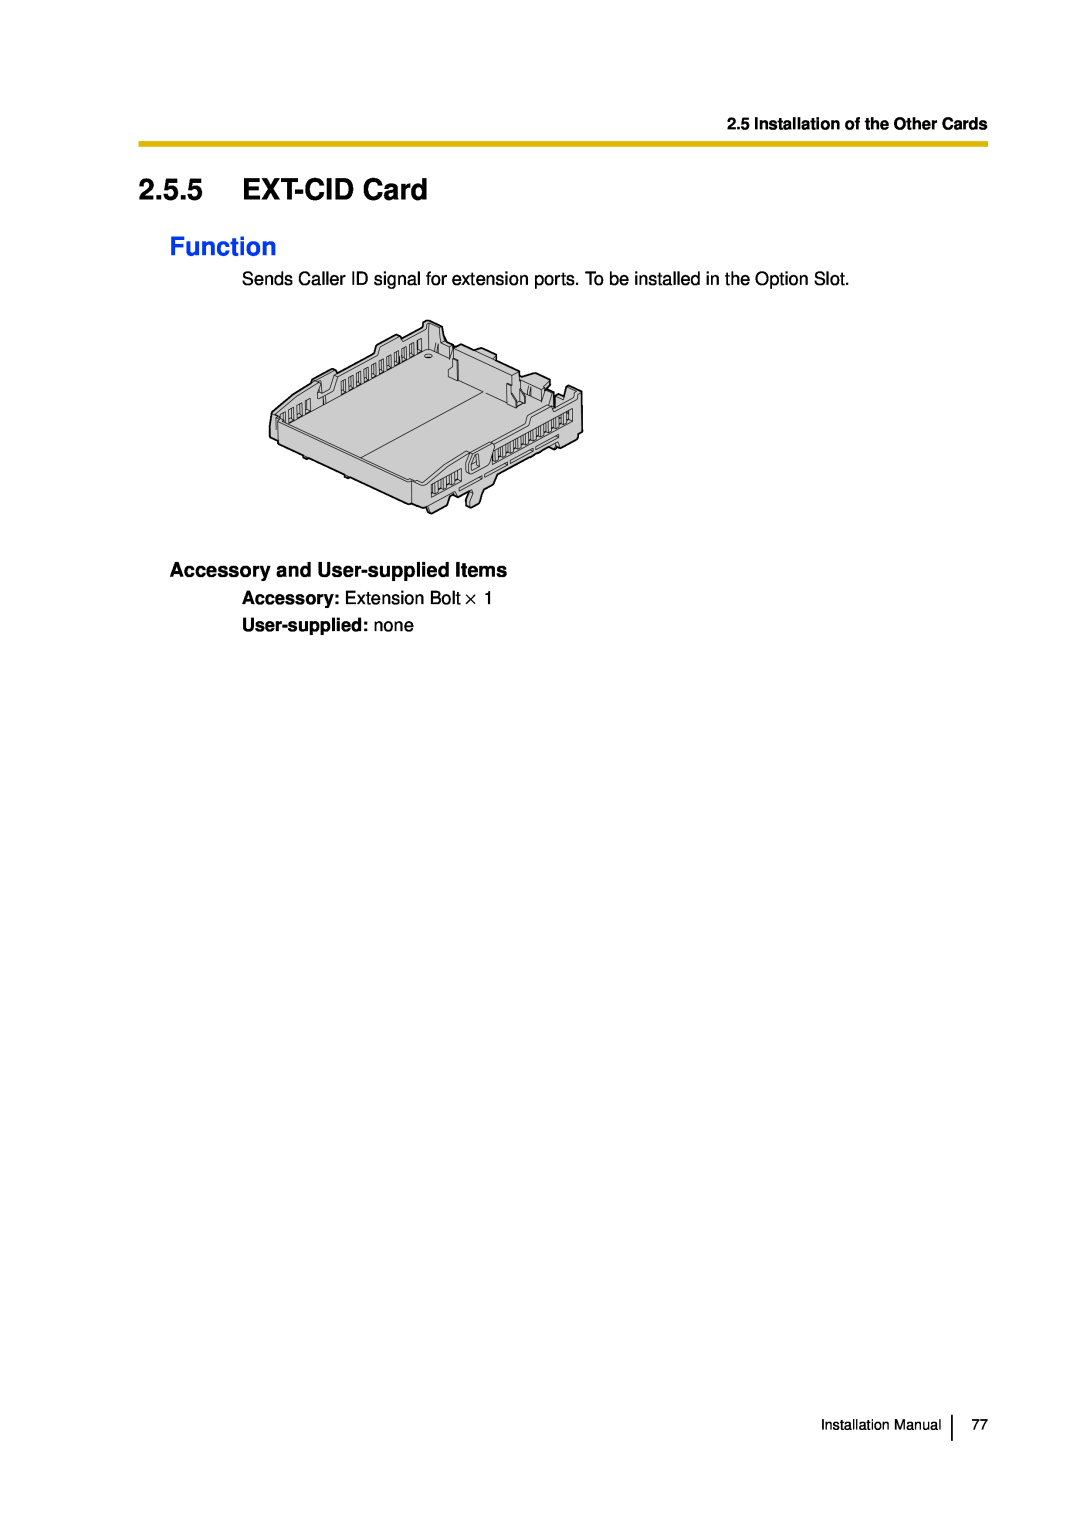 Panasonic KX-TDA30 installation manual 2.5.5EXT-CIDCard, Function, User-supplied: none, Installation of the Other Cards 